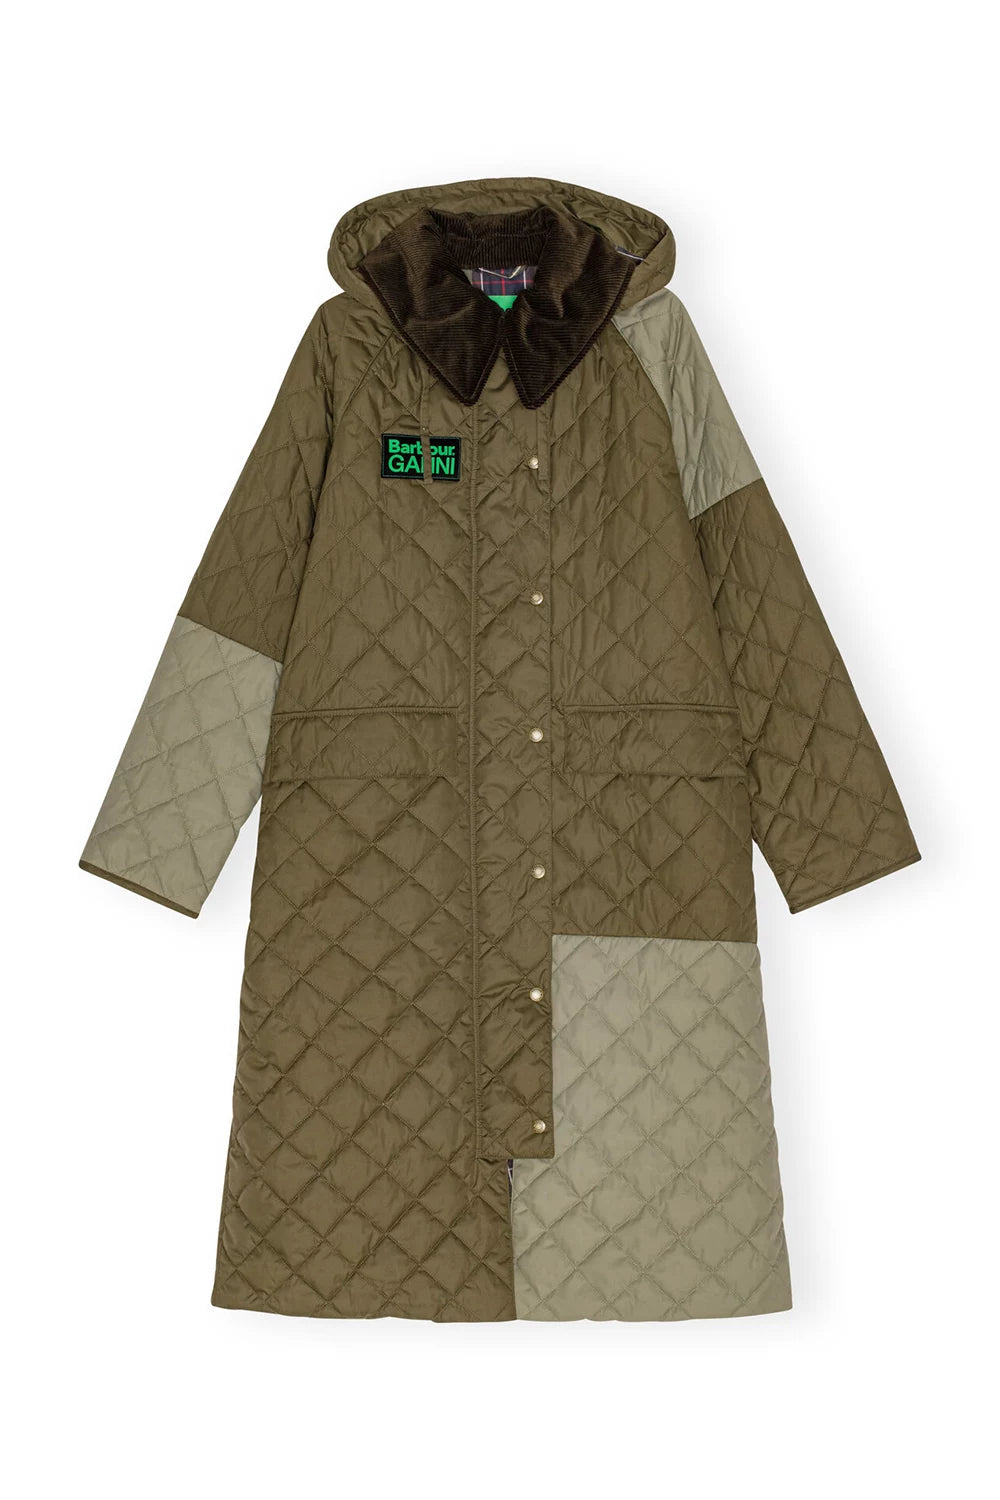 Barbour-GANNI-Burghley-Quilted-Jacket-Fern-Light-Moss-Classic